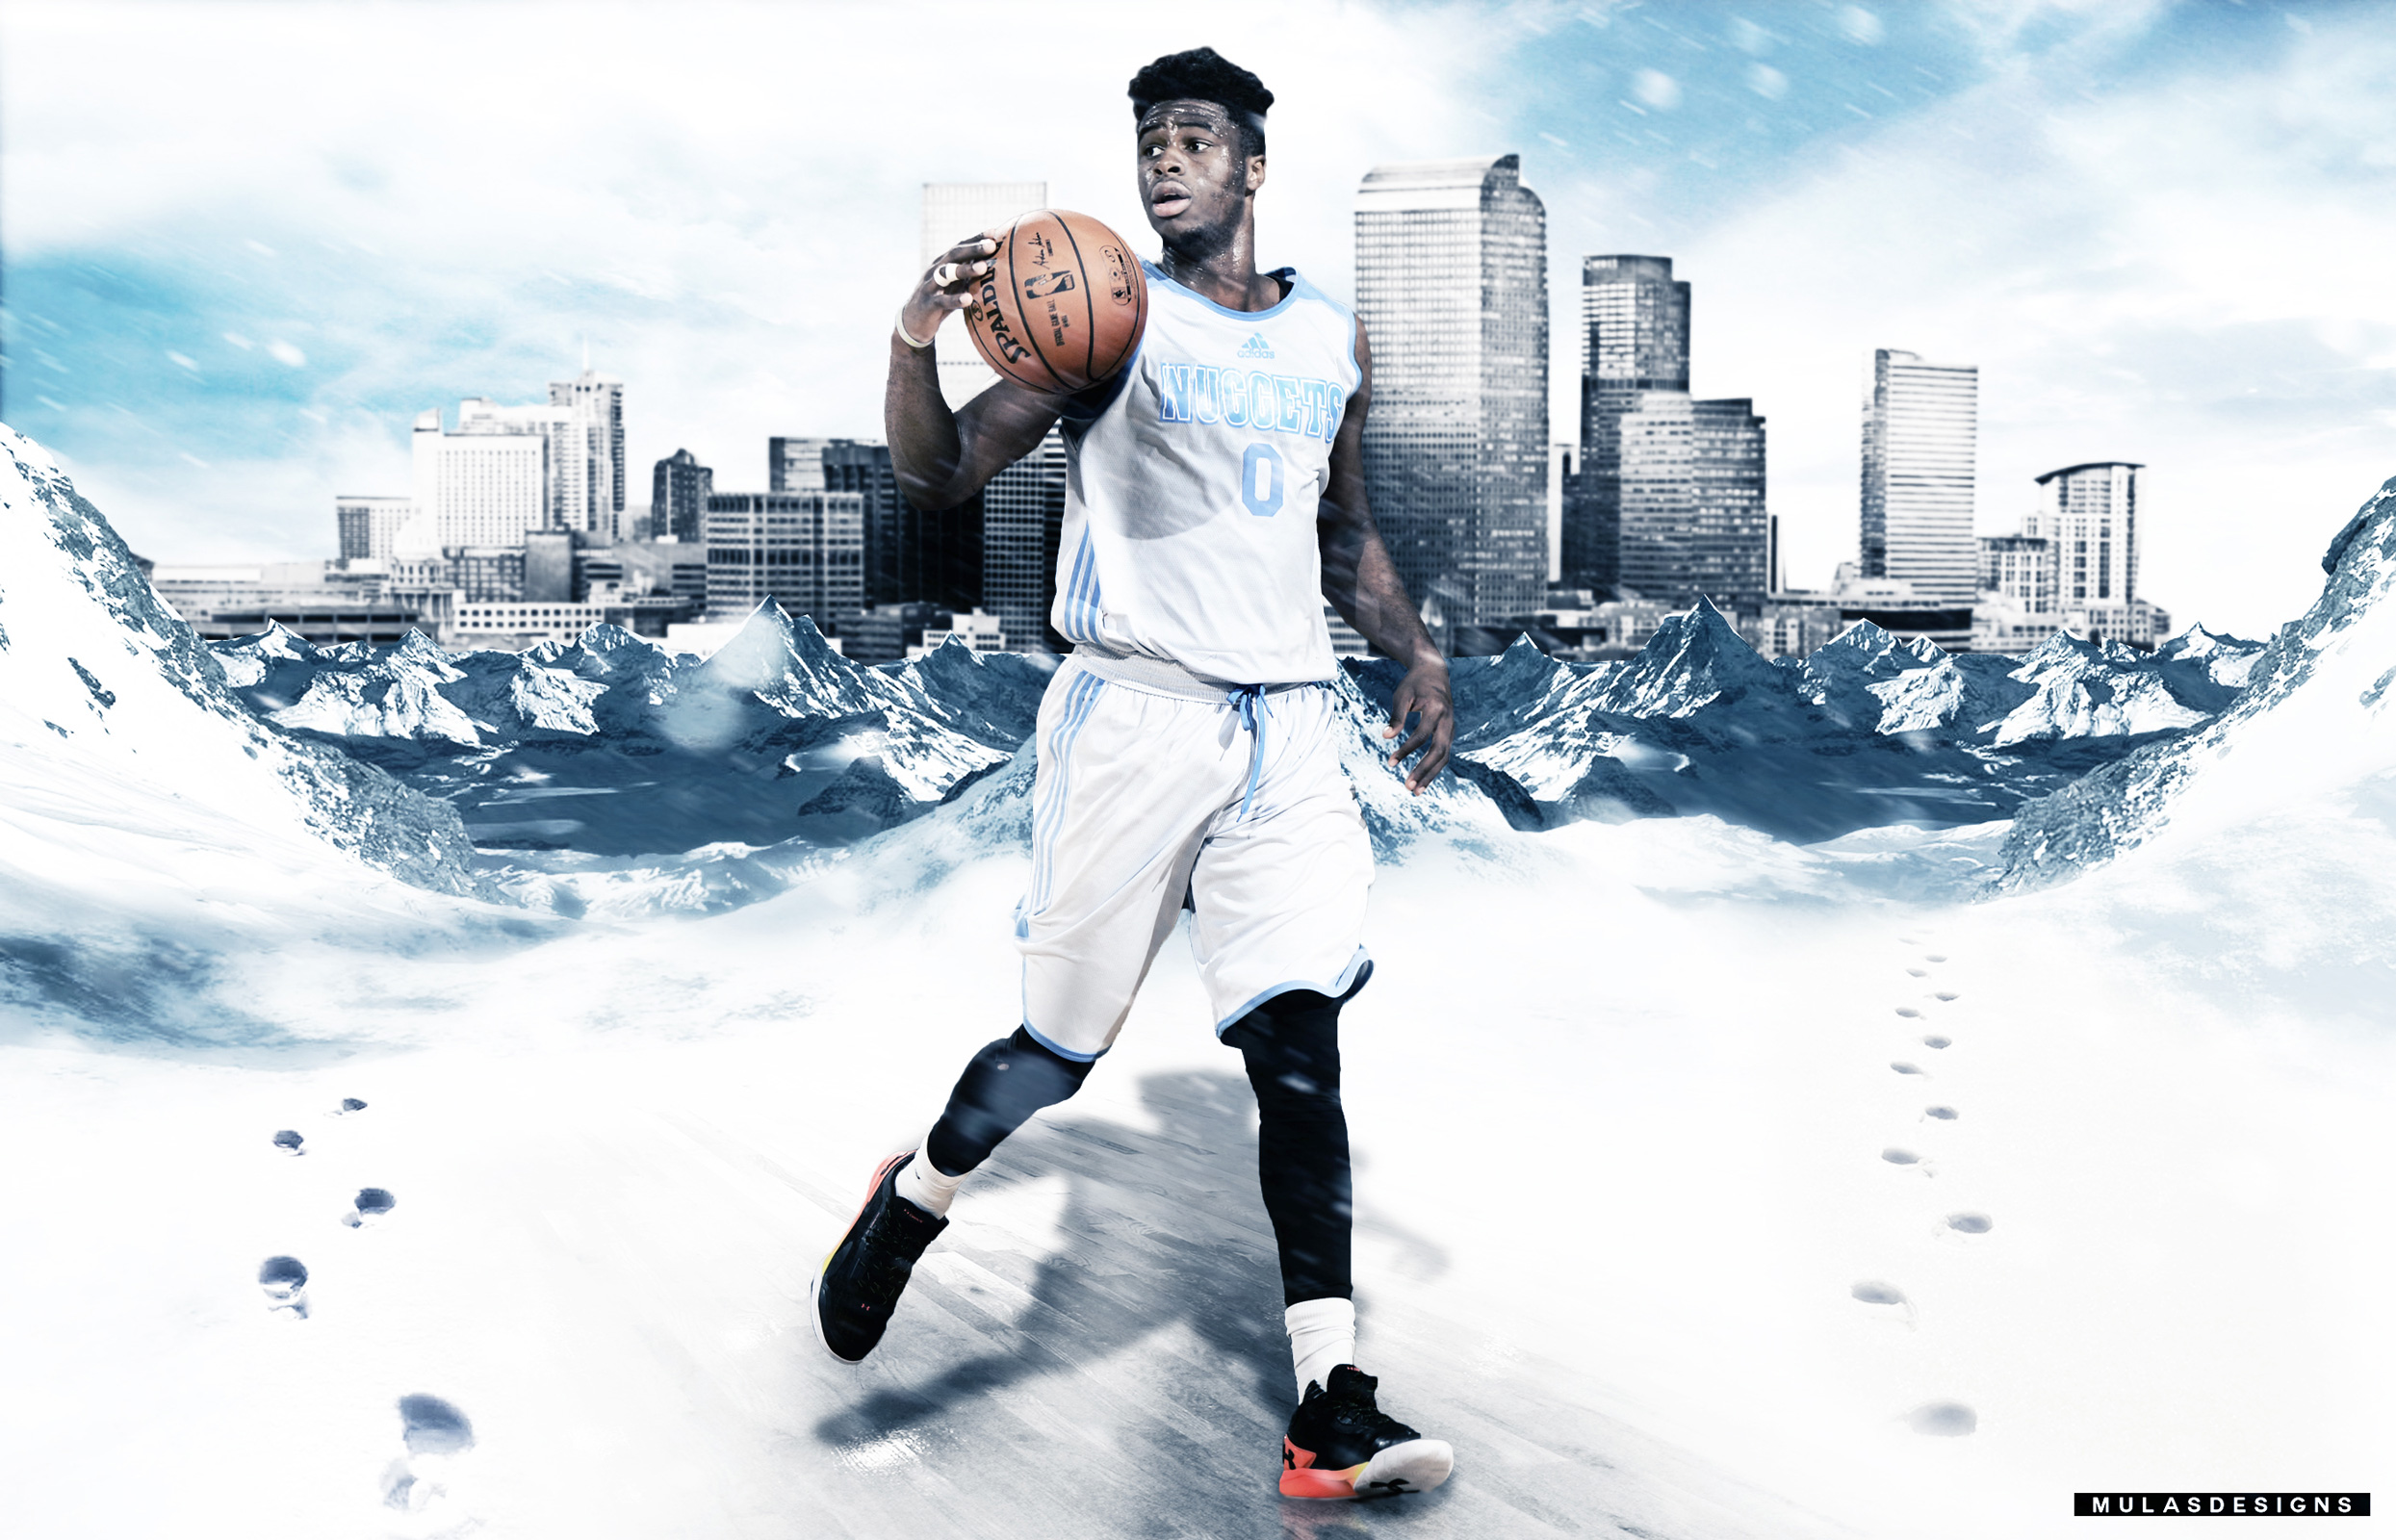 Denver Nuggets Wallpapers | Basketball Wallpapers at ...